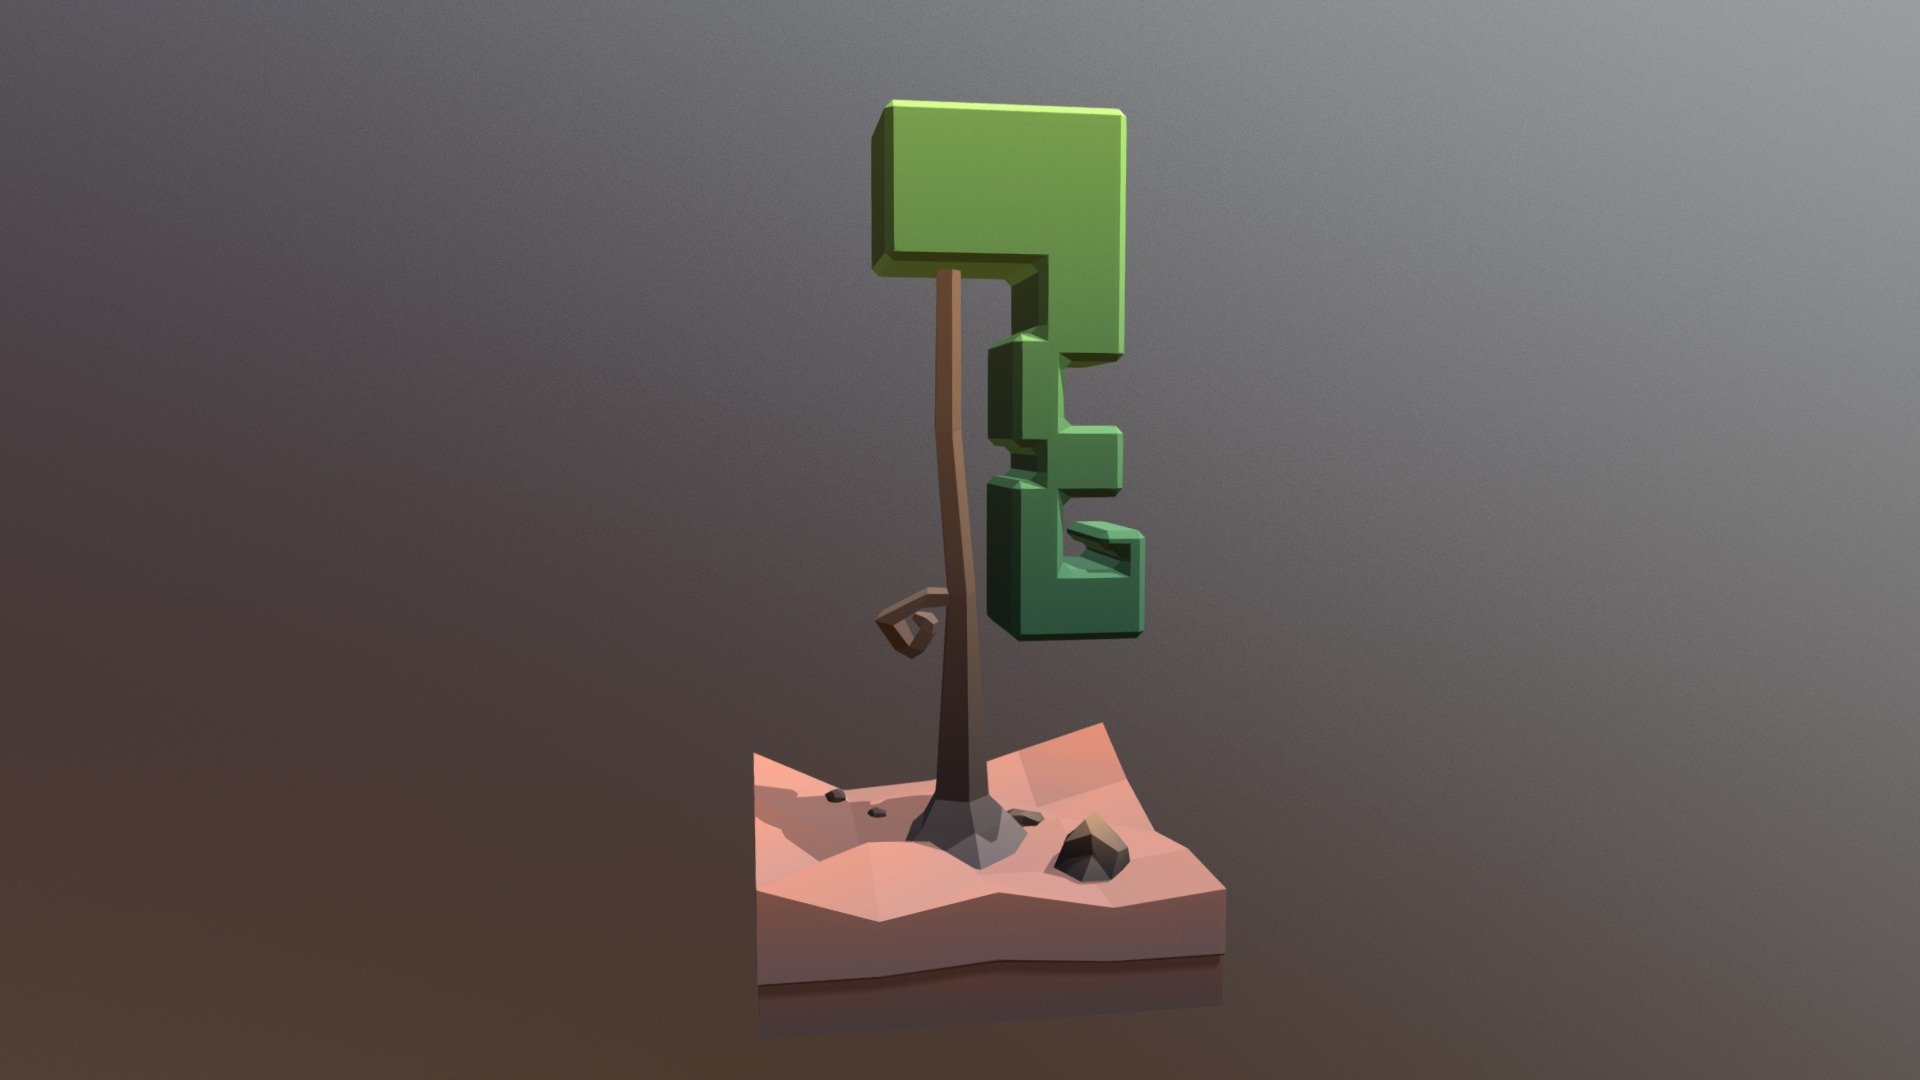 Low Poly Tree: The Curly Tree